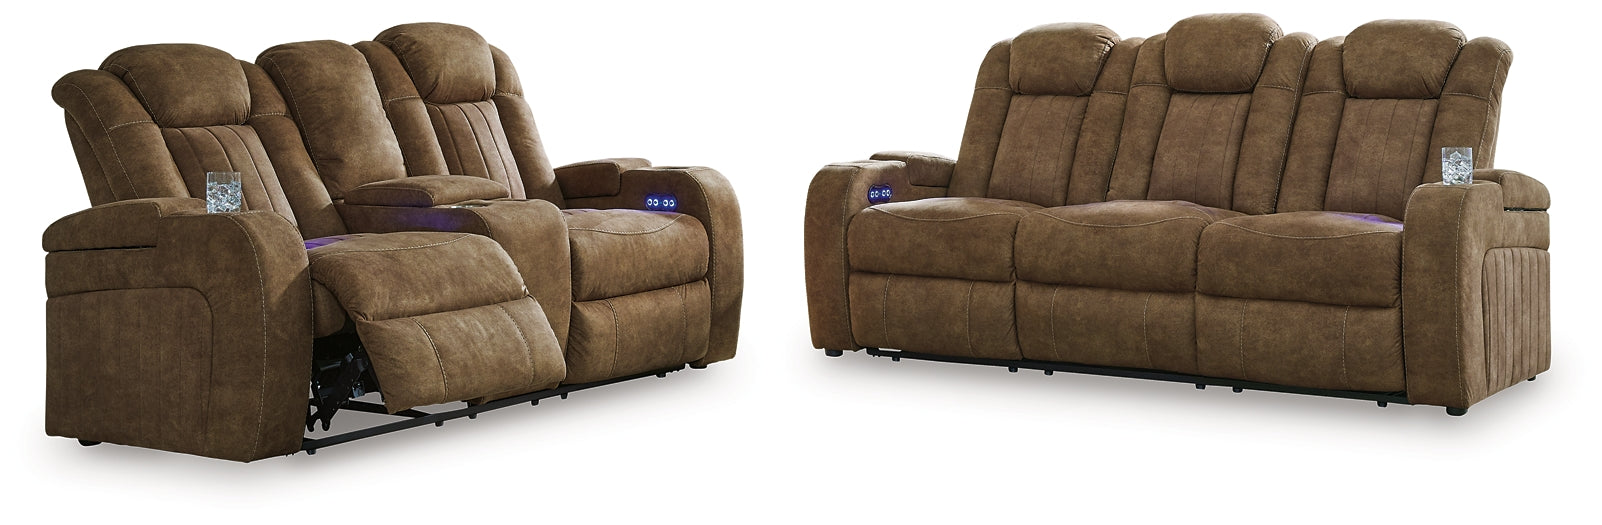 Wolfridge Sofa and Loveseat at Walker Mattress and Furniture Locations in Cedar Park and Belton TX.